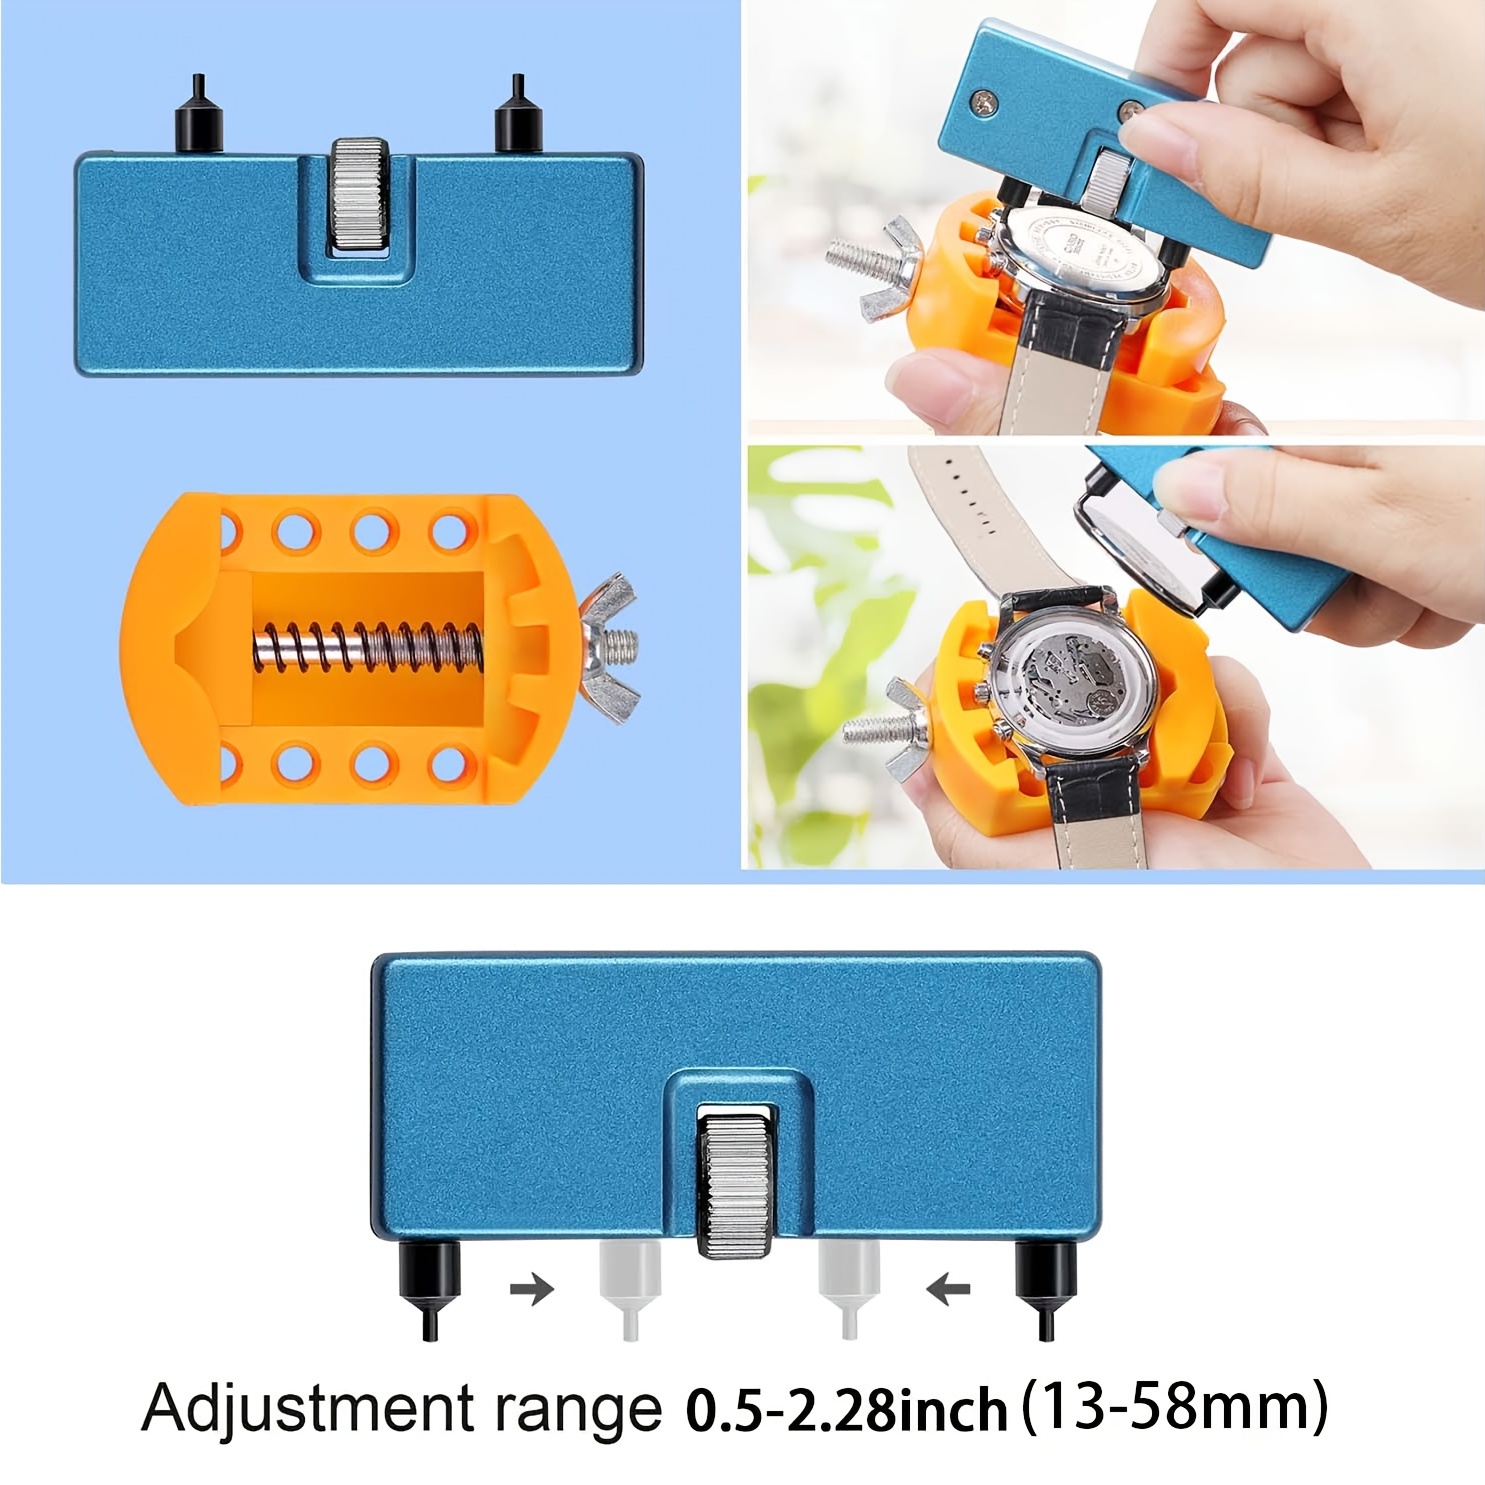 Buy 32 Piece Watch Battery Replacement Kit and Repair Screwdriver Set with Free Shipping